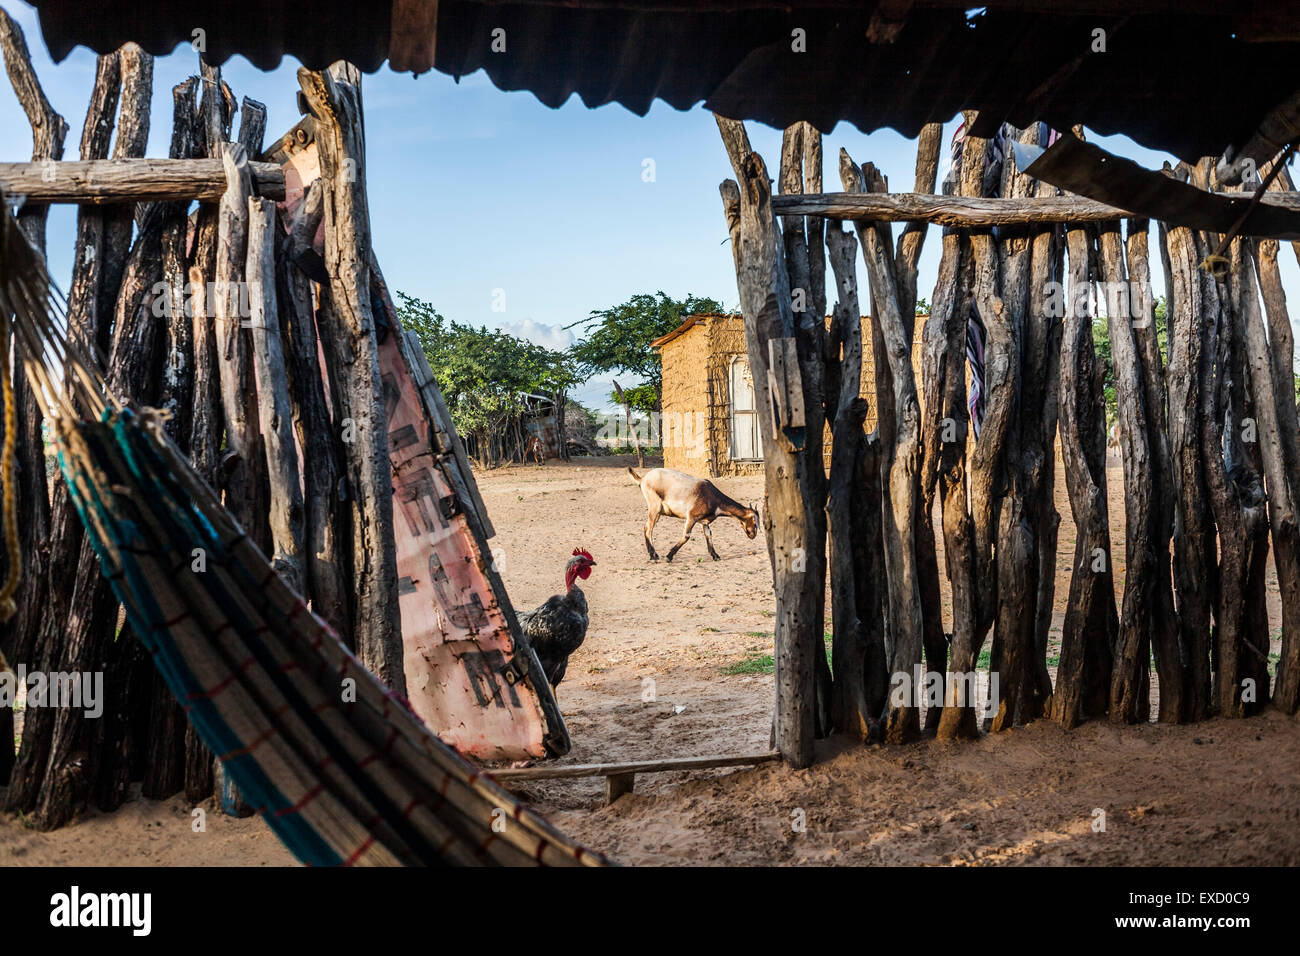 View from inside a home in a Wayuu indigenous 'rancheria' or rural settlement in La Guajira, Colombia. Stock Photo